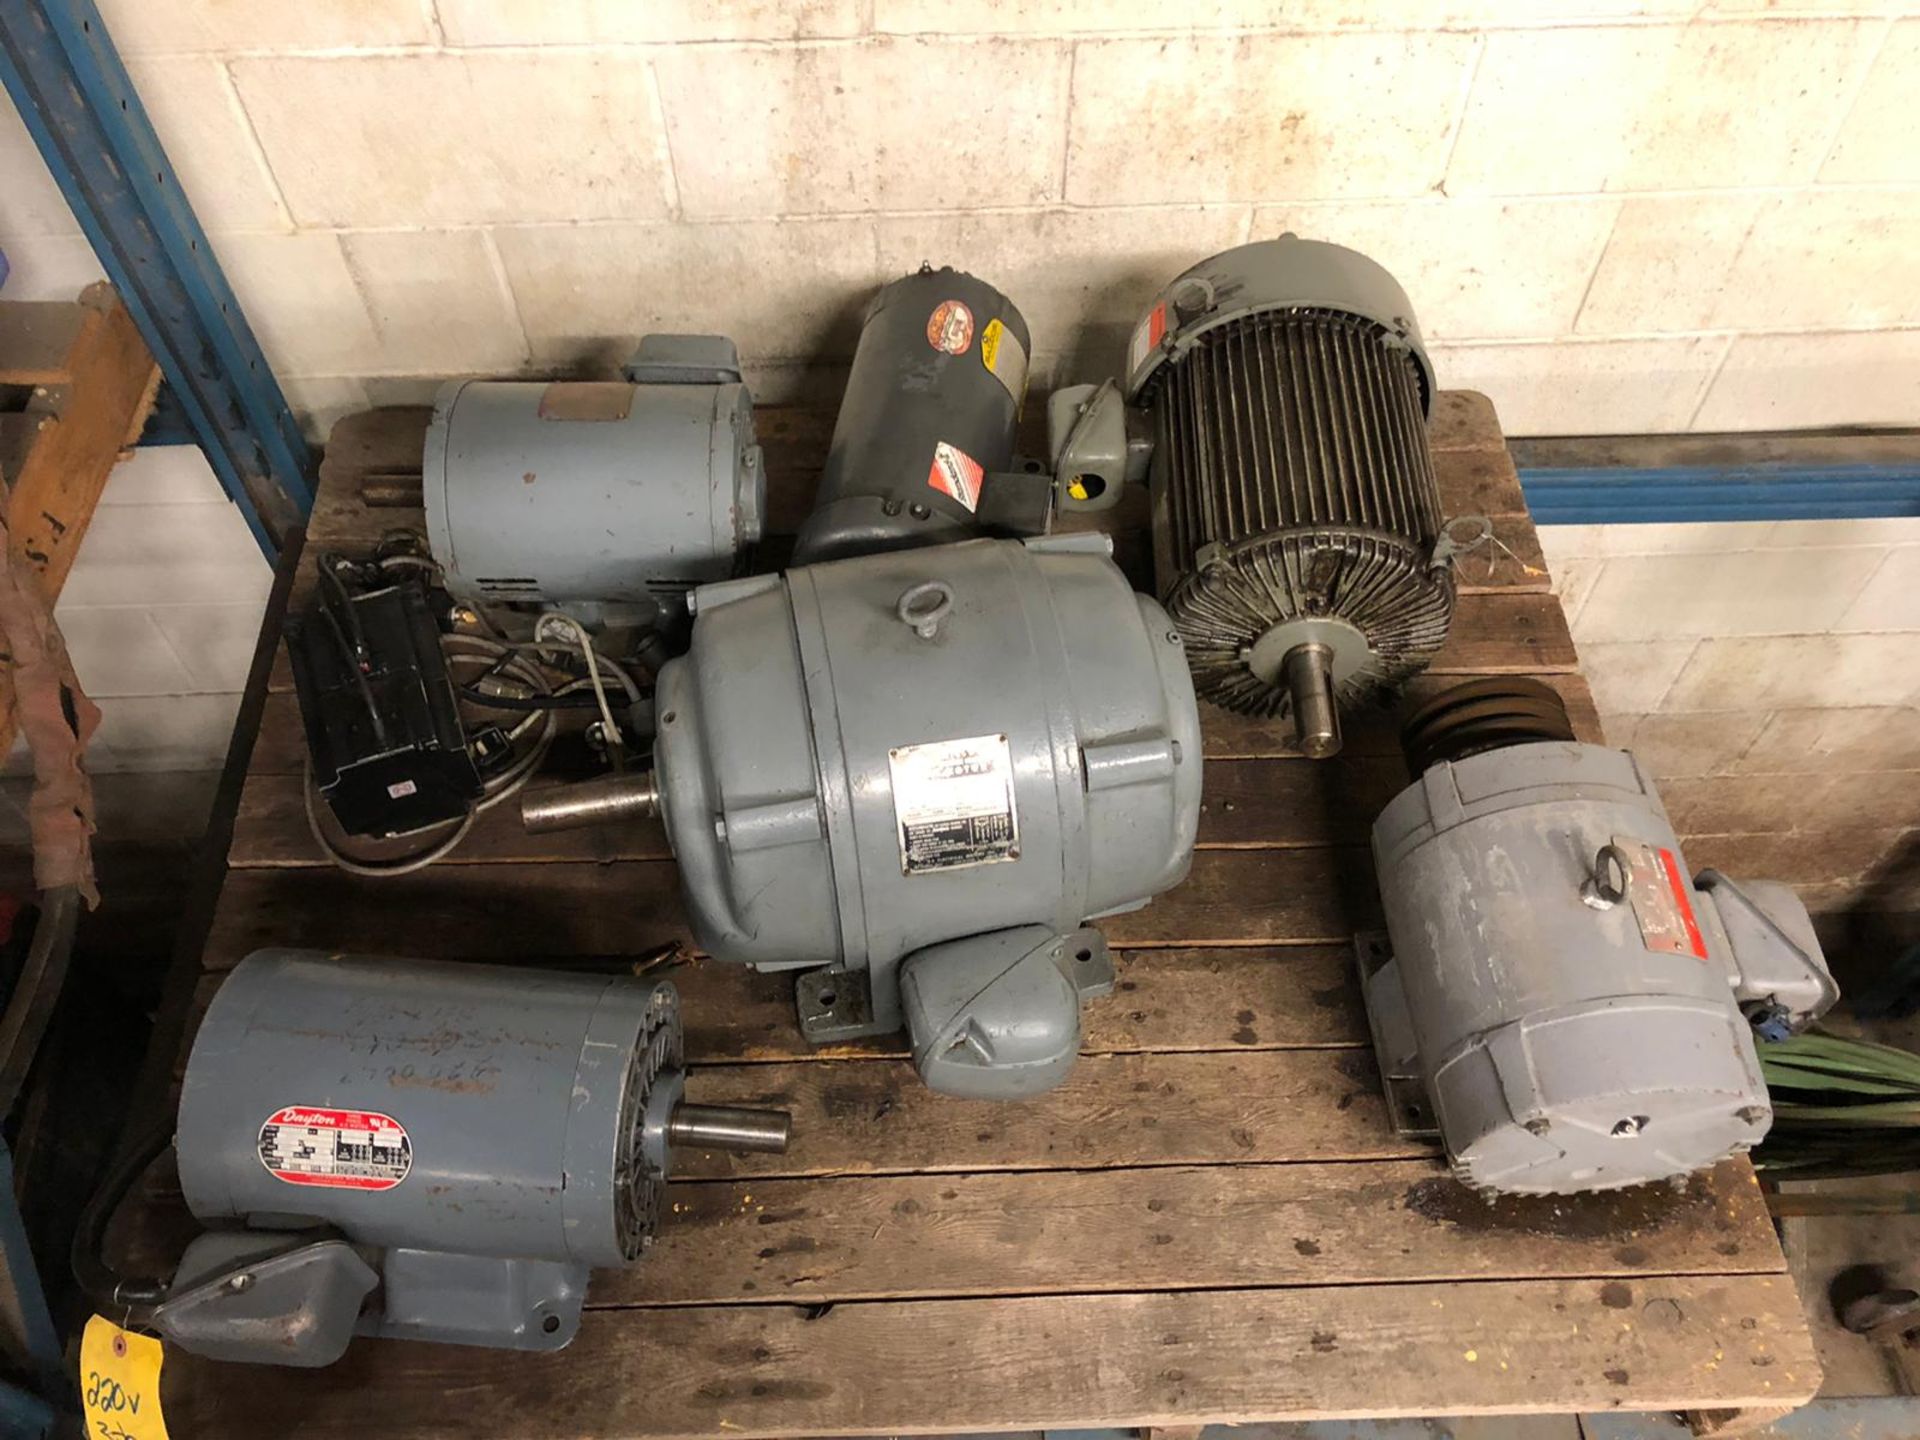 Lot of 7 (7 units) Industrial Motors with Drive Units - Dayton, Baldor and more - Image 2 of 2